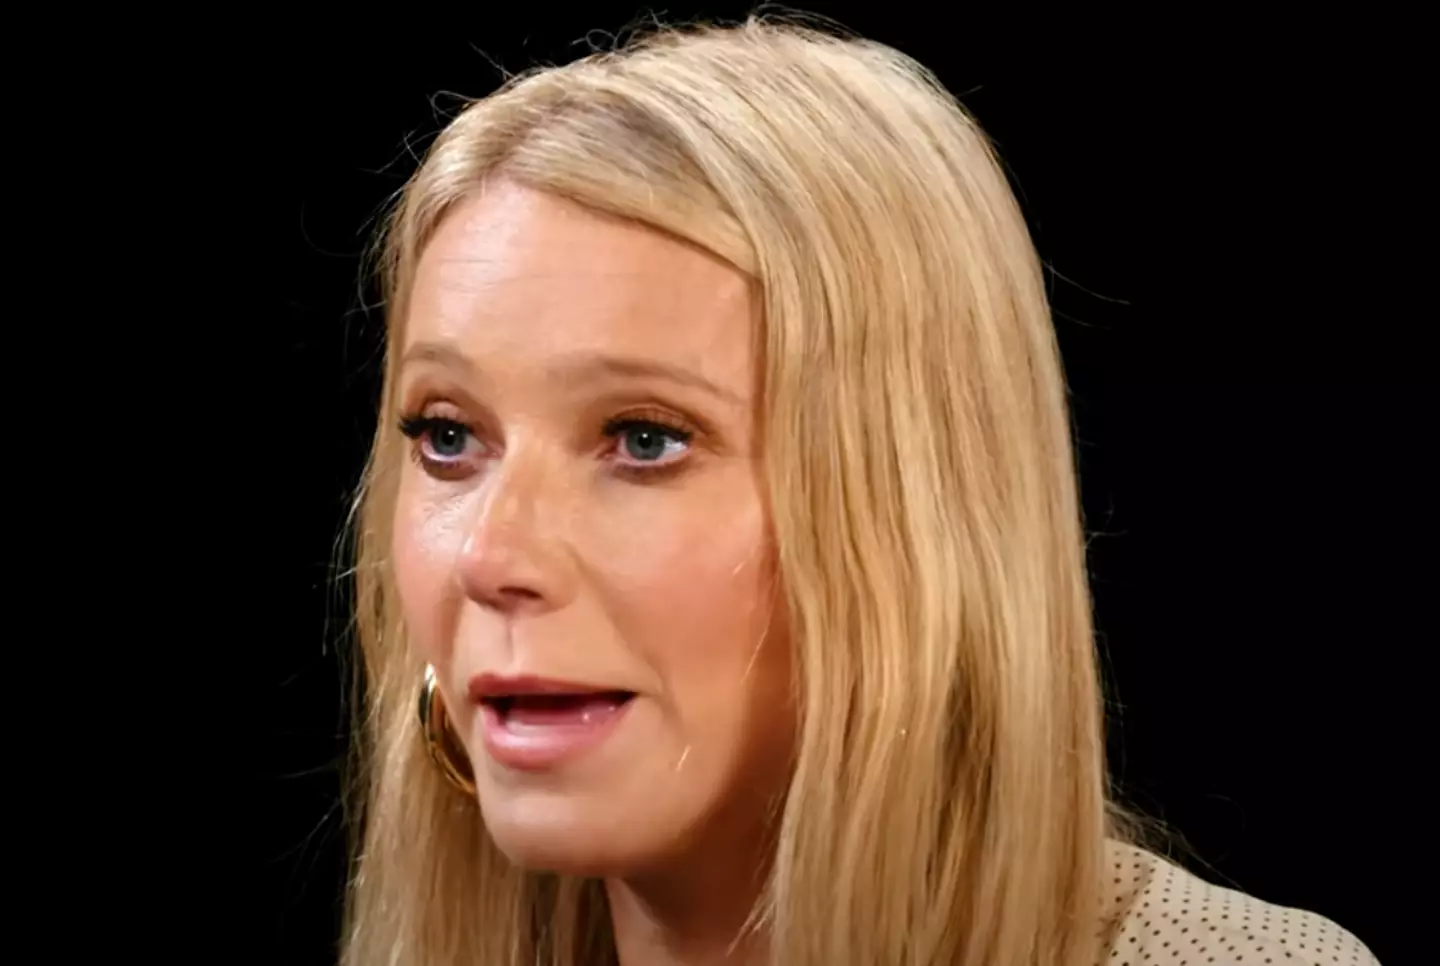 Gwyneth Paltrow reflected on her long career and the movie making industry.